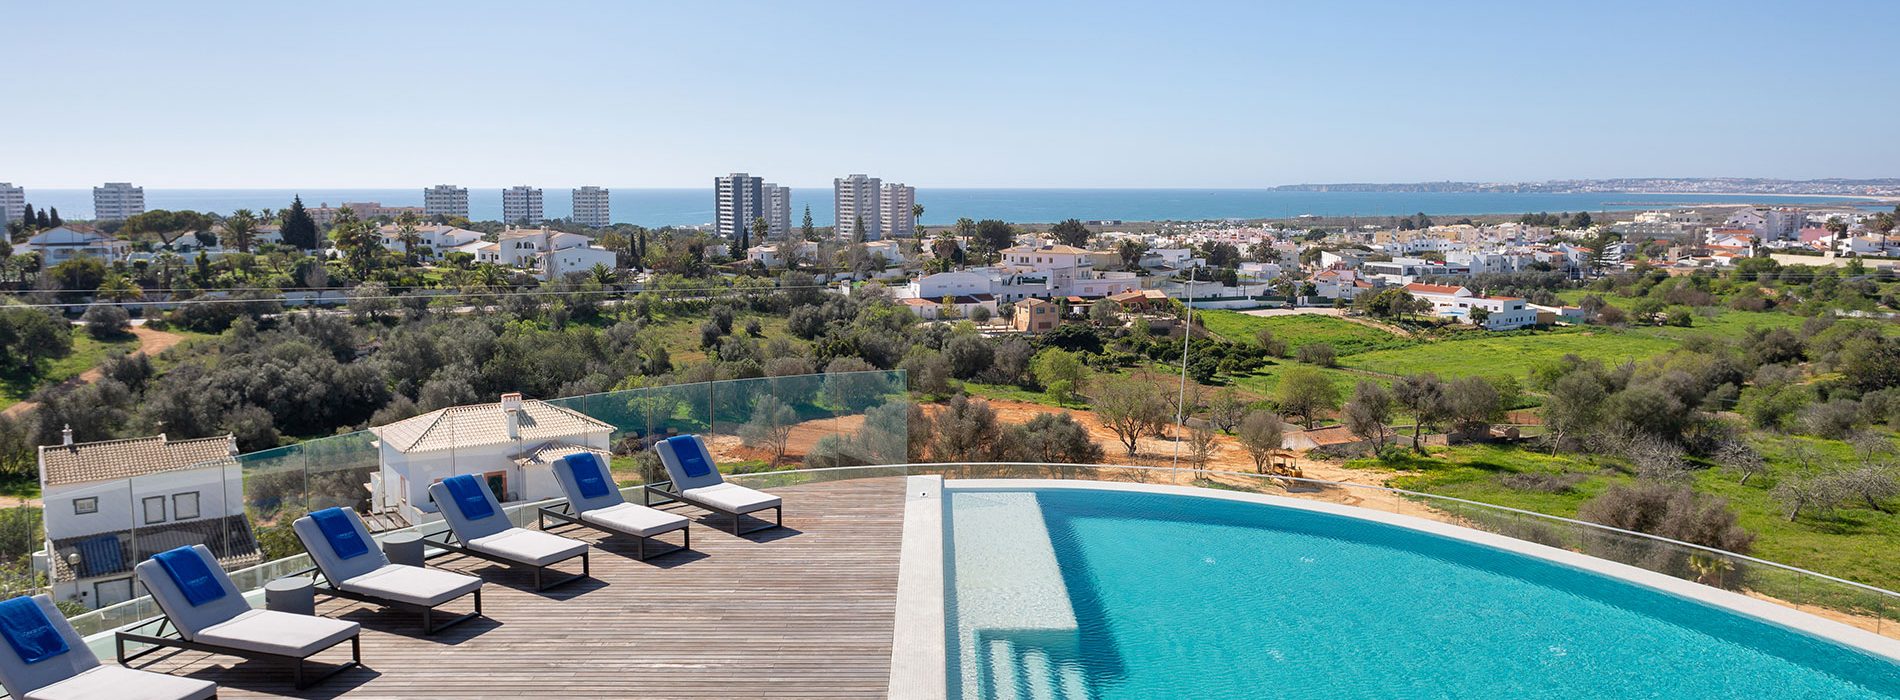 View of Alvor from Longevity Health and Wellness Hotel